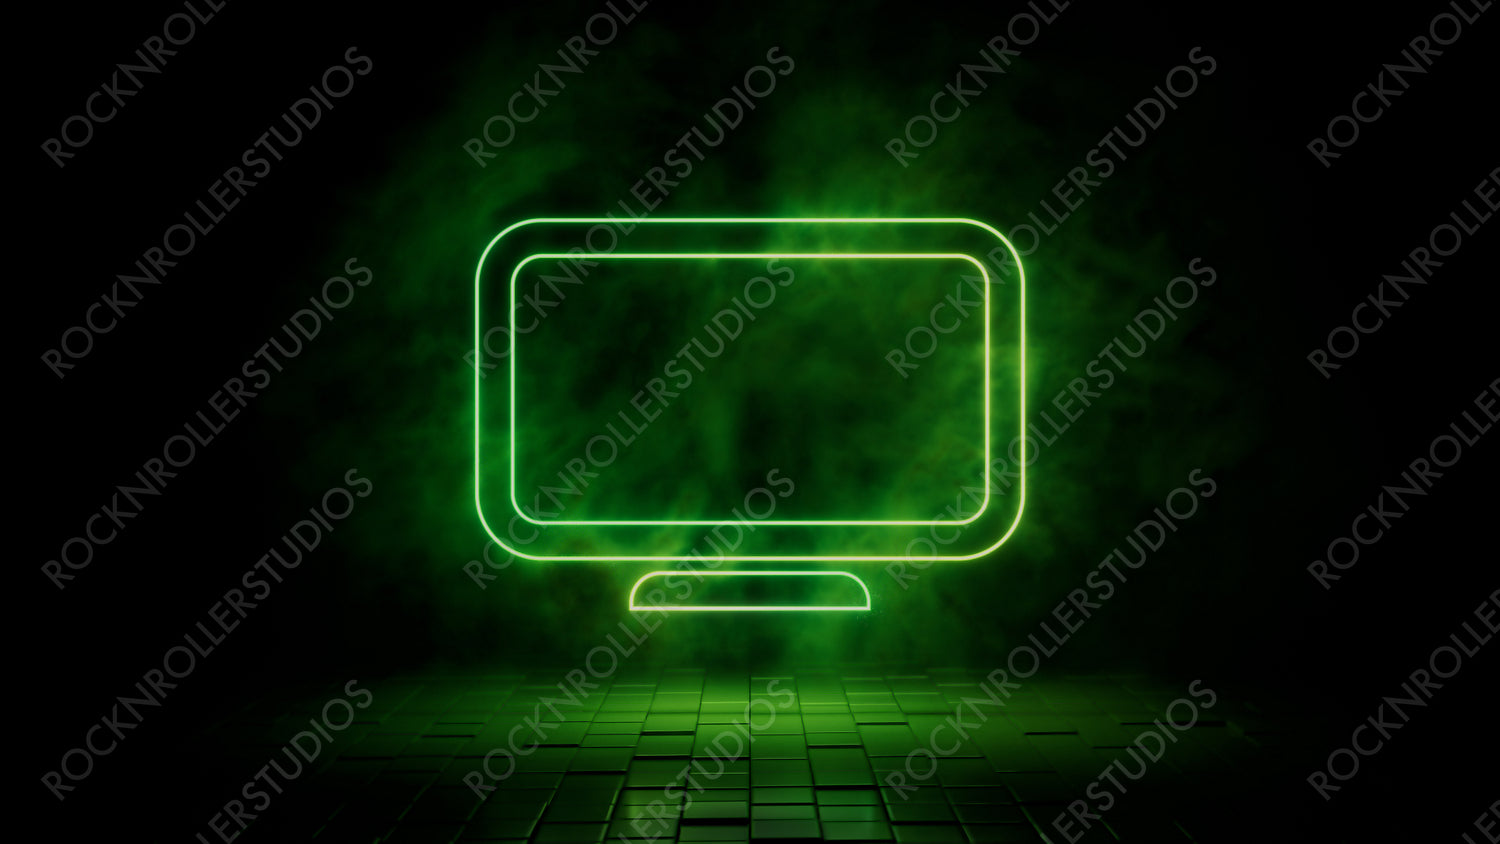 Green neon light display icon. Vibrant colored technology symbol, isolated on a black background. 3D Render